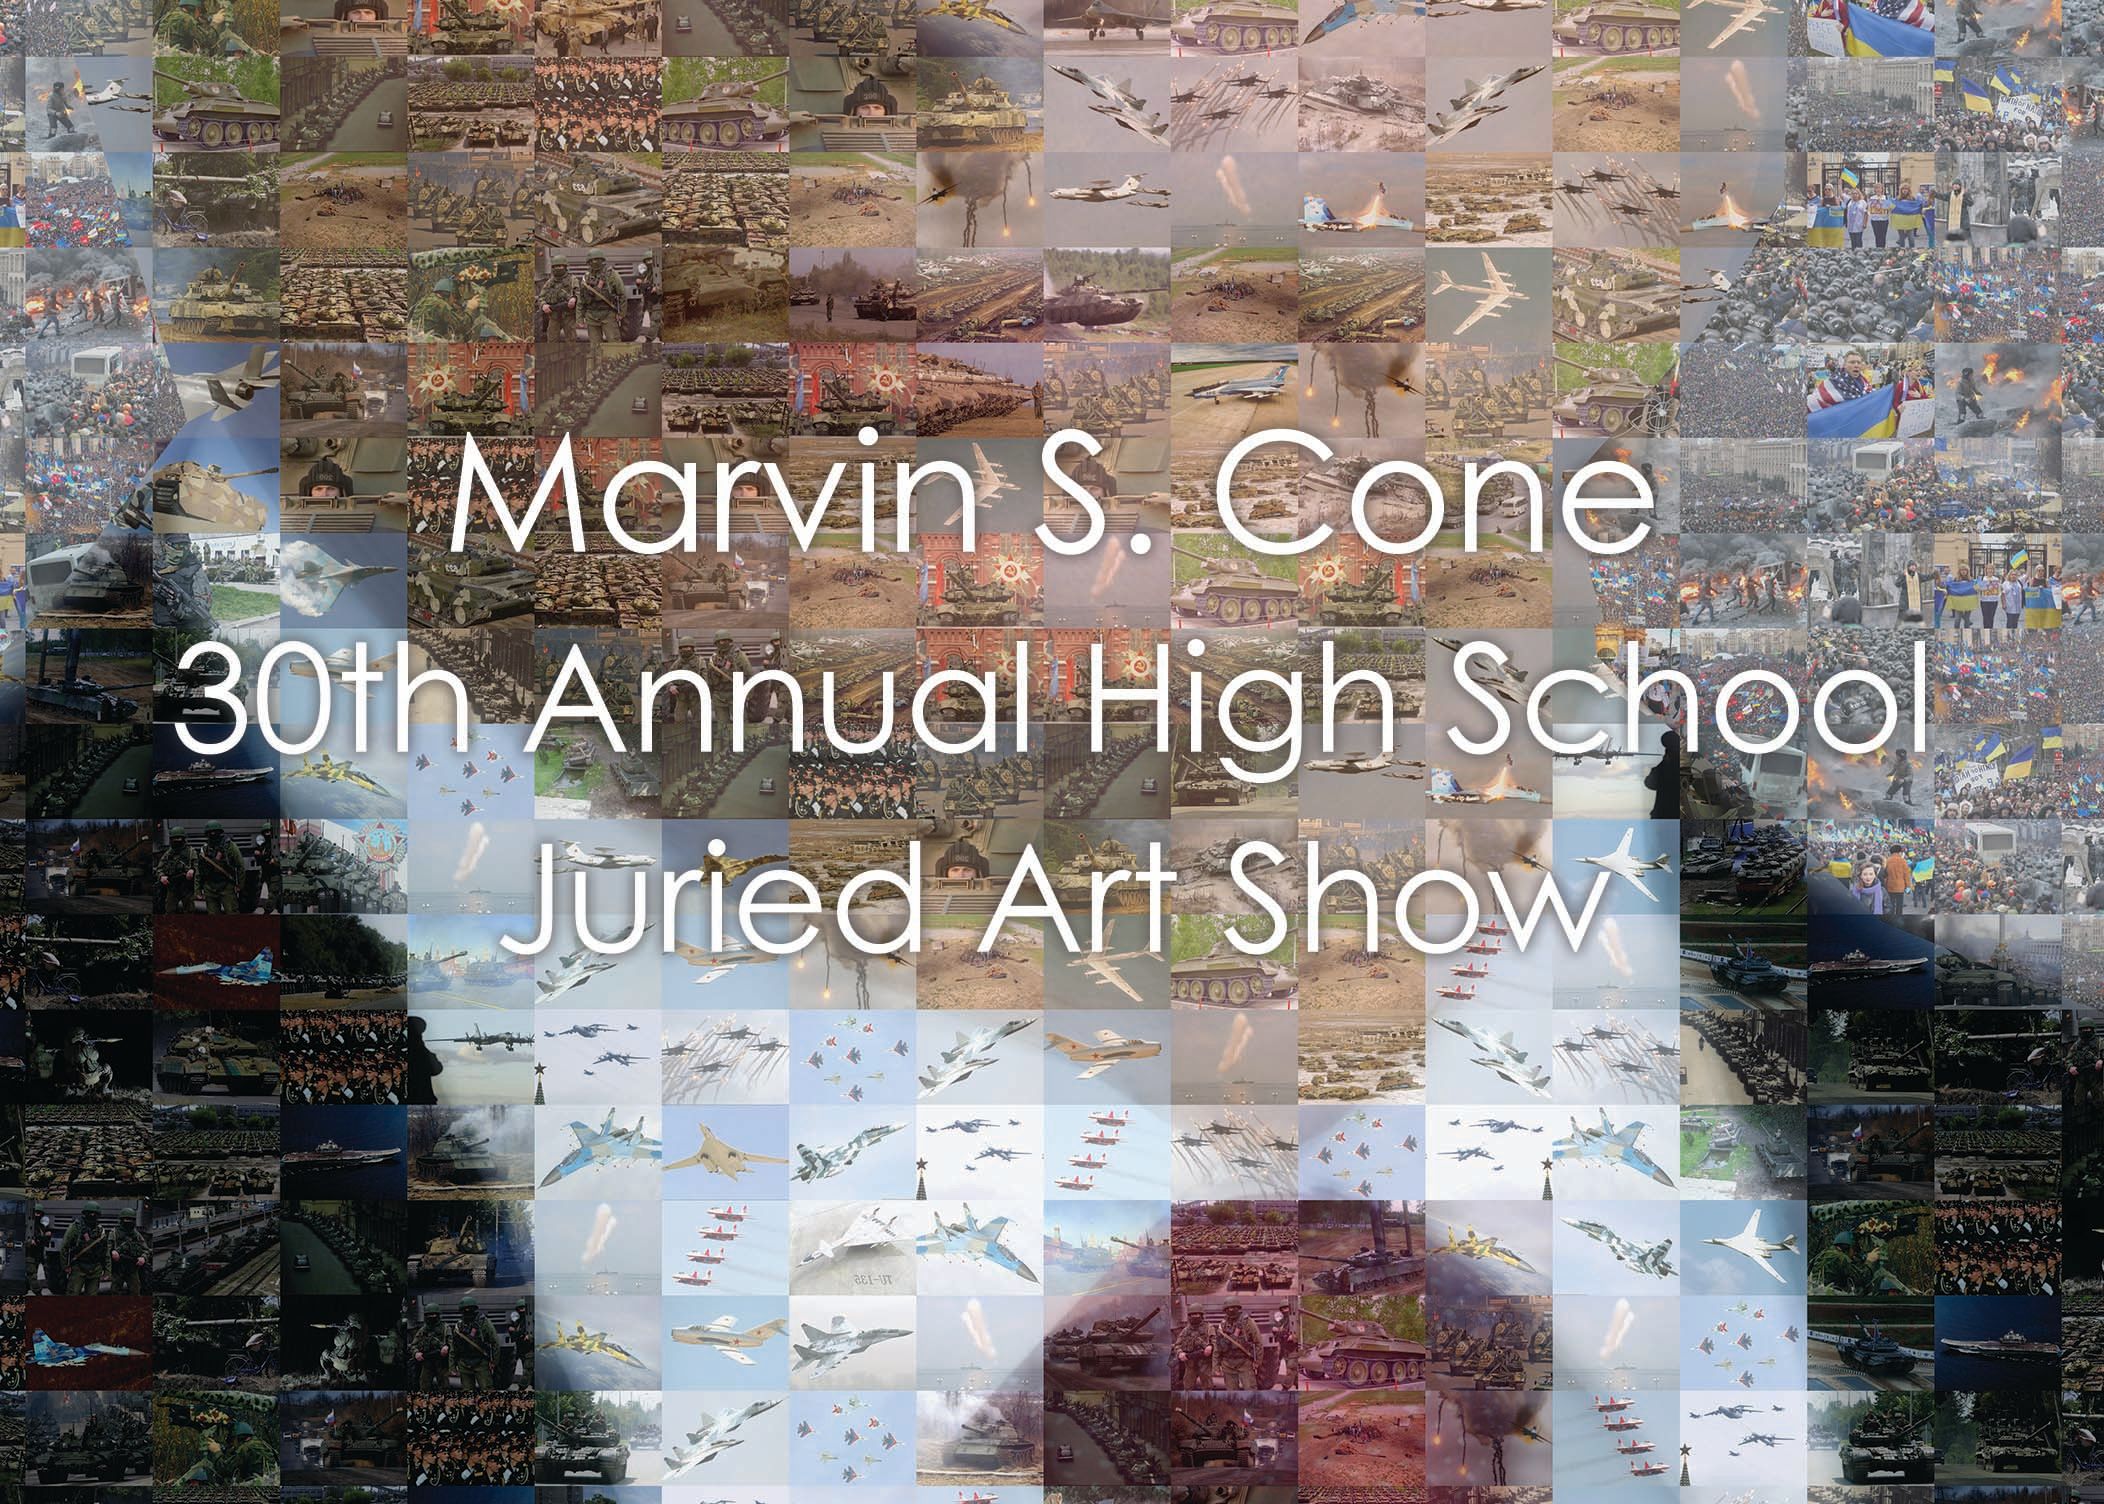 Marvin S. Cone 30th Annual High School Juried Art Show